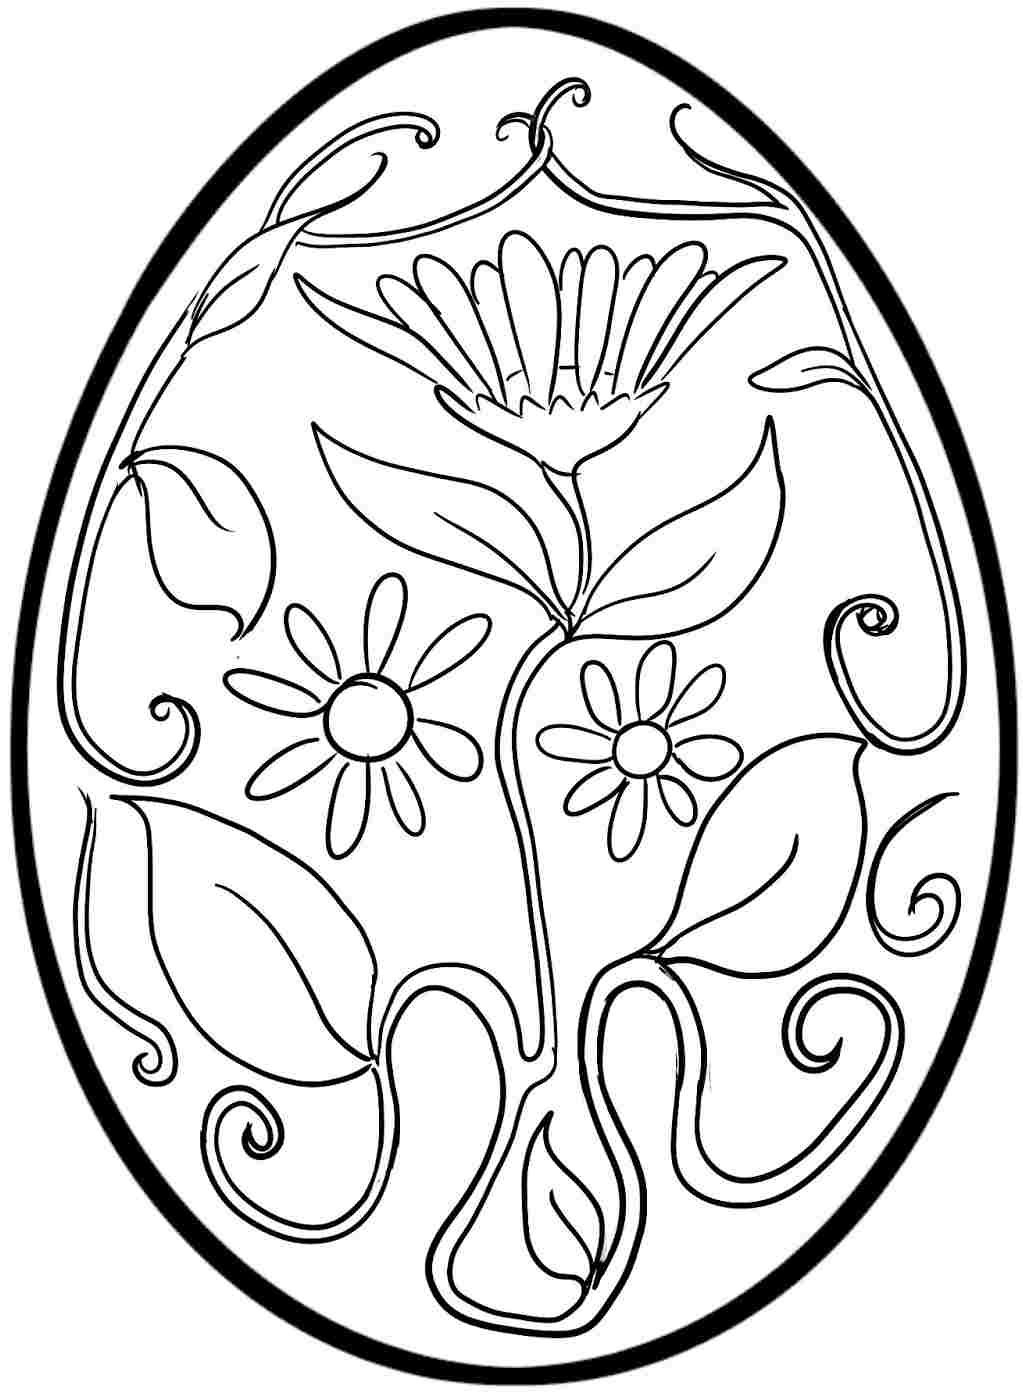 Coloring Pages : Printable Easter Coloring Pictures For Kidseaster - Free Printable Easter Colouring Sheets